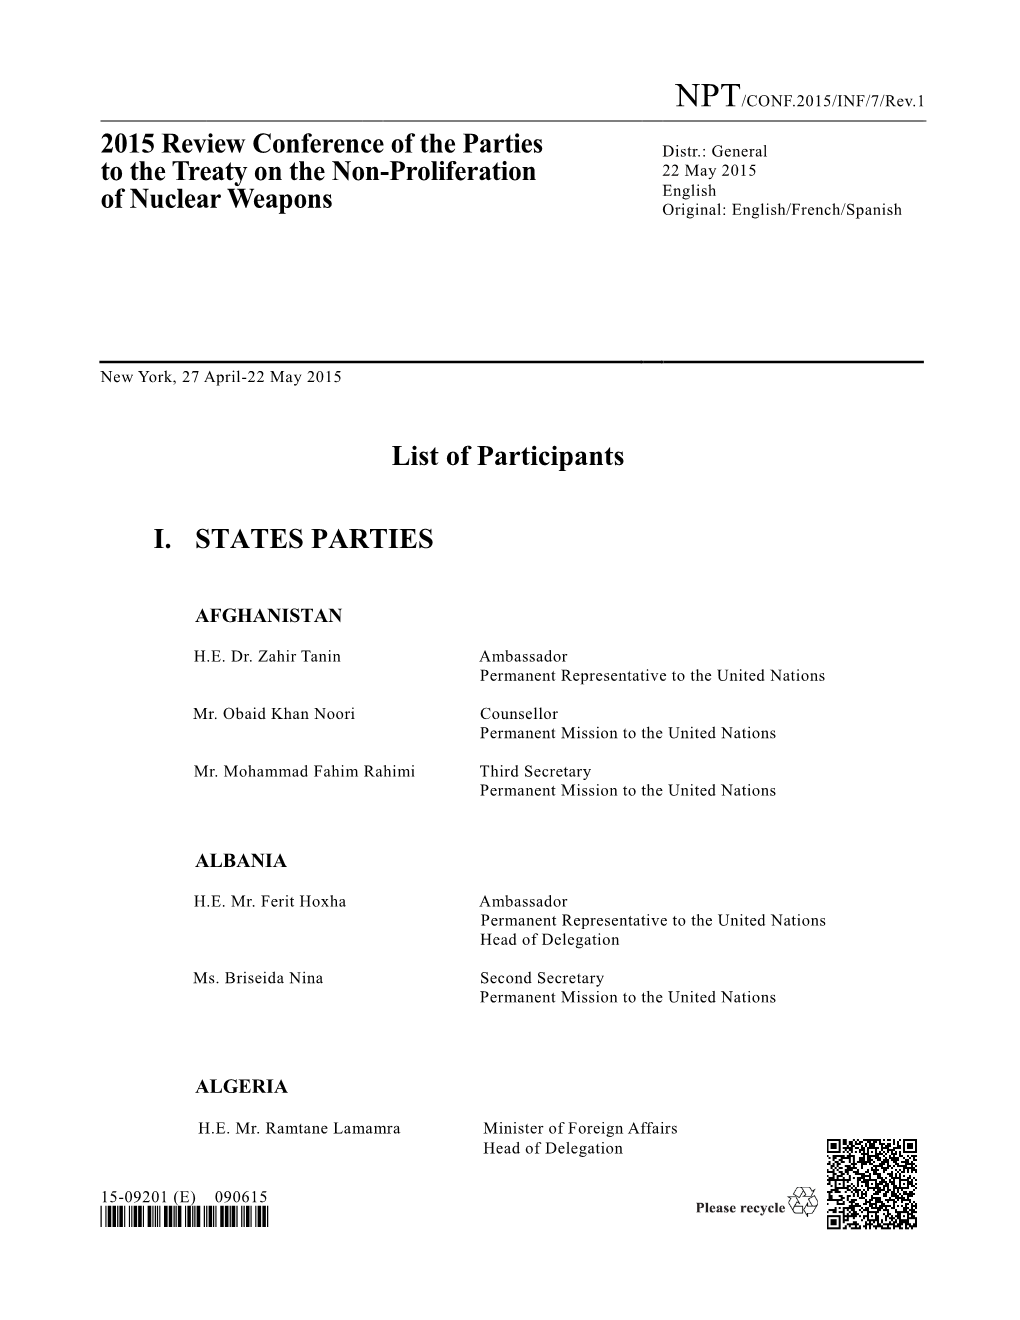 2015 Review Conference of the Parties to the Treaty on the Non